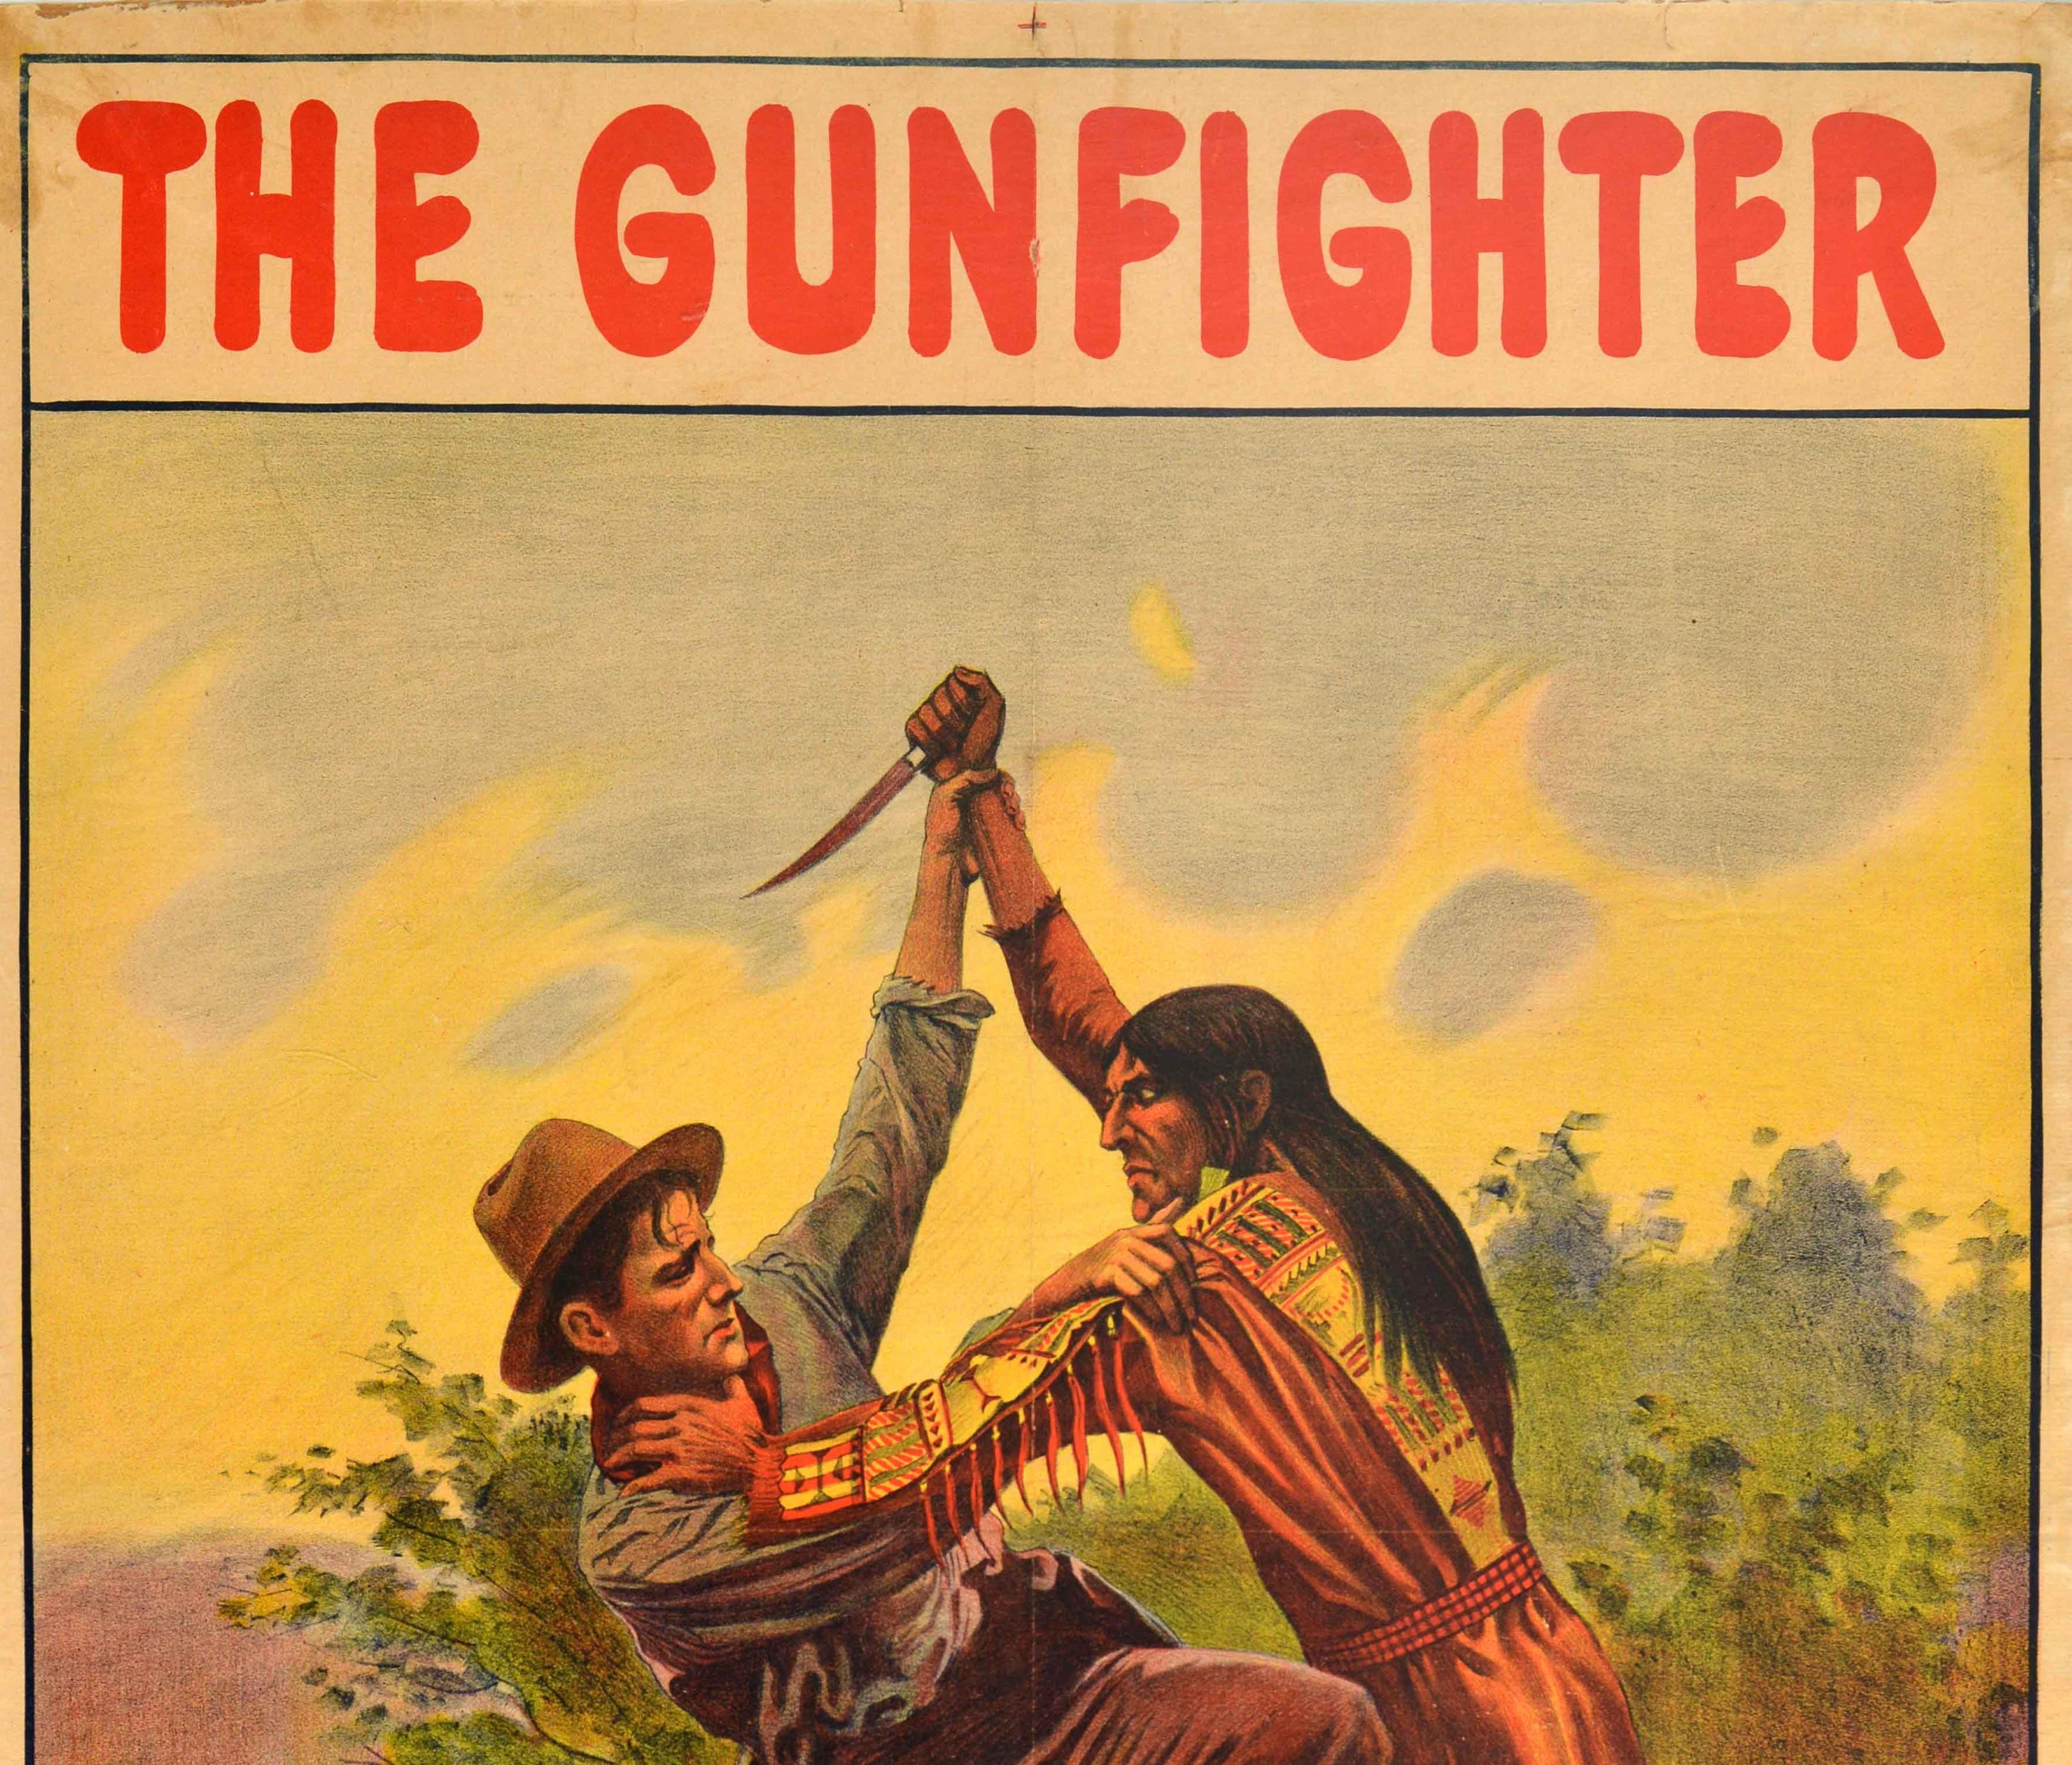 Original antique film poster for a Wild Western movie The Gunfighter The Outlaws Redemption featuring two men fighting with the title text in bold red lettering above and subtitle below next to the Nestor Film Company logo. Good condition, restored